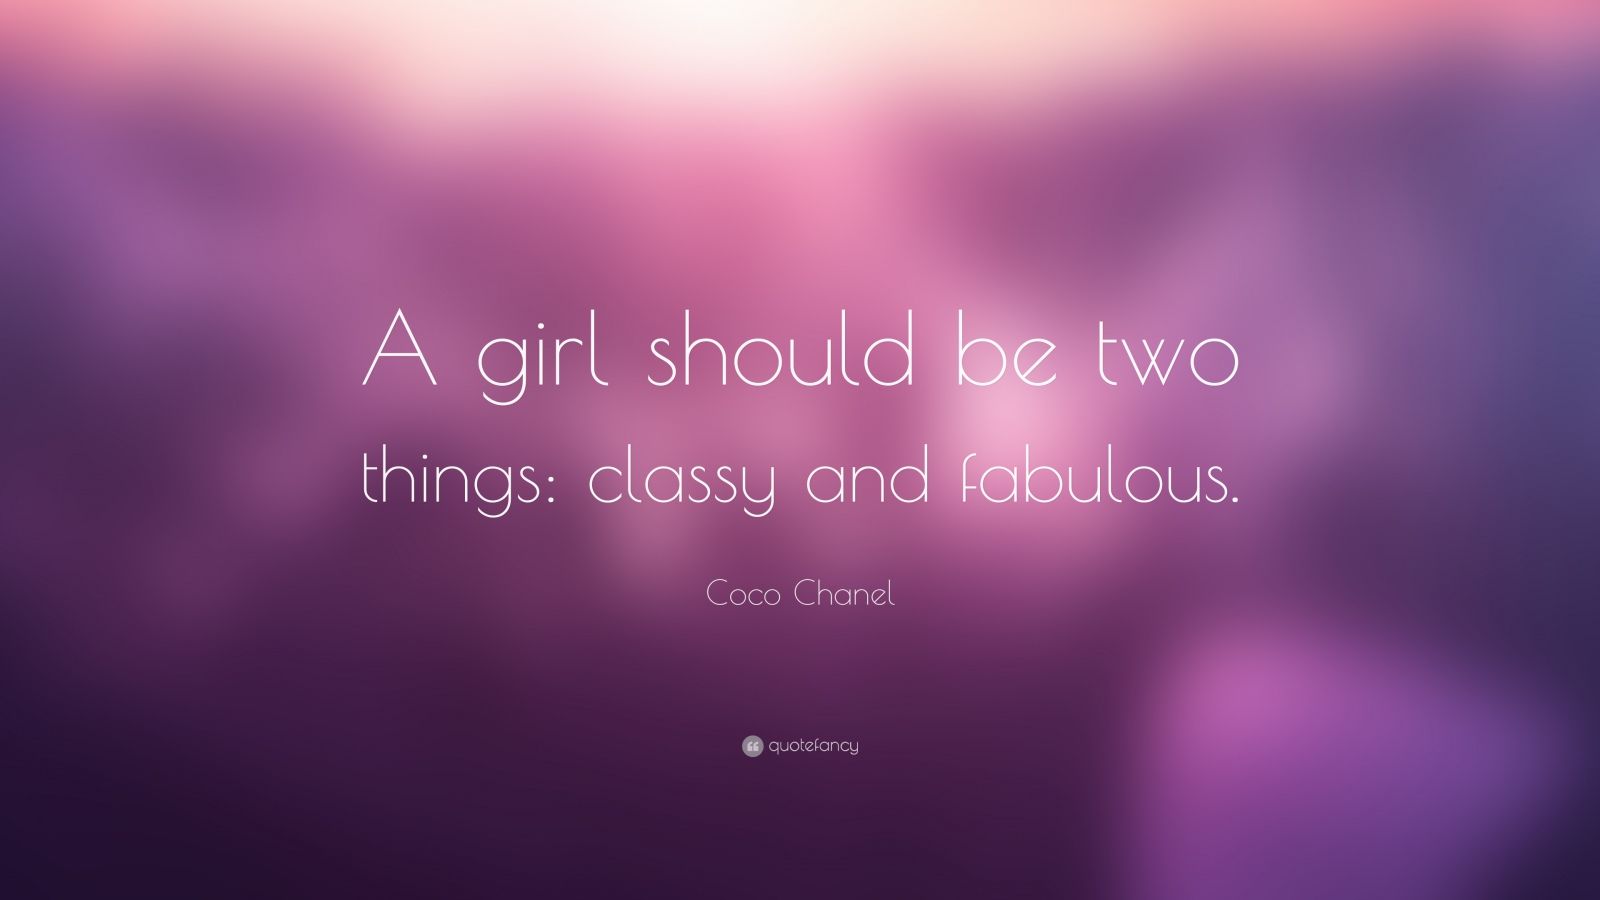 A girl should be two things: classy and fabulous.” - Coco Chanel